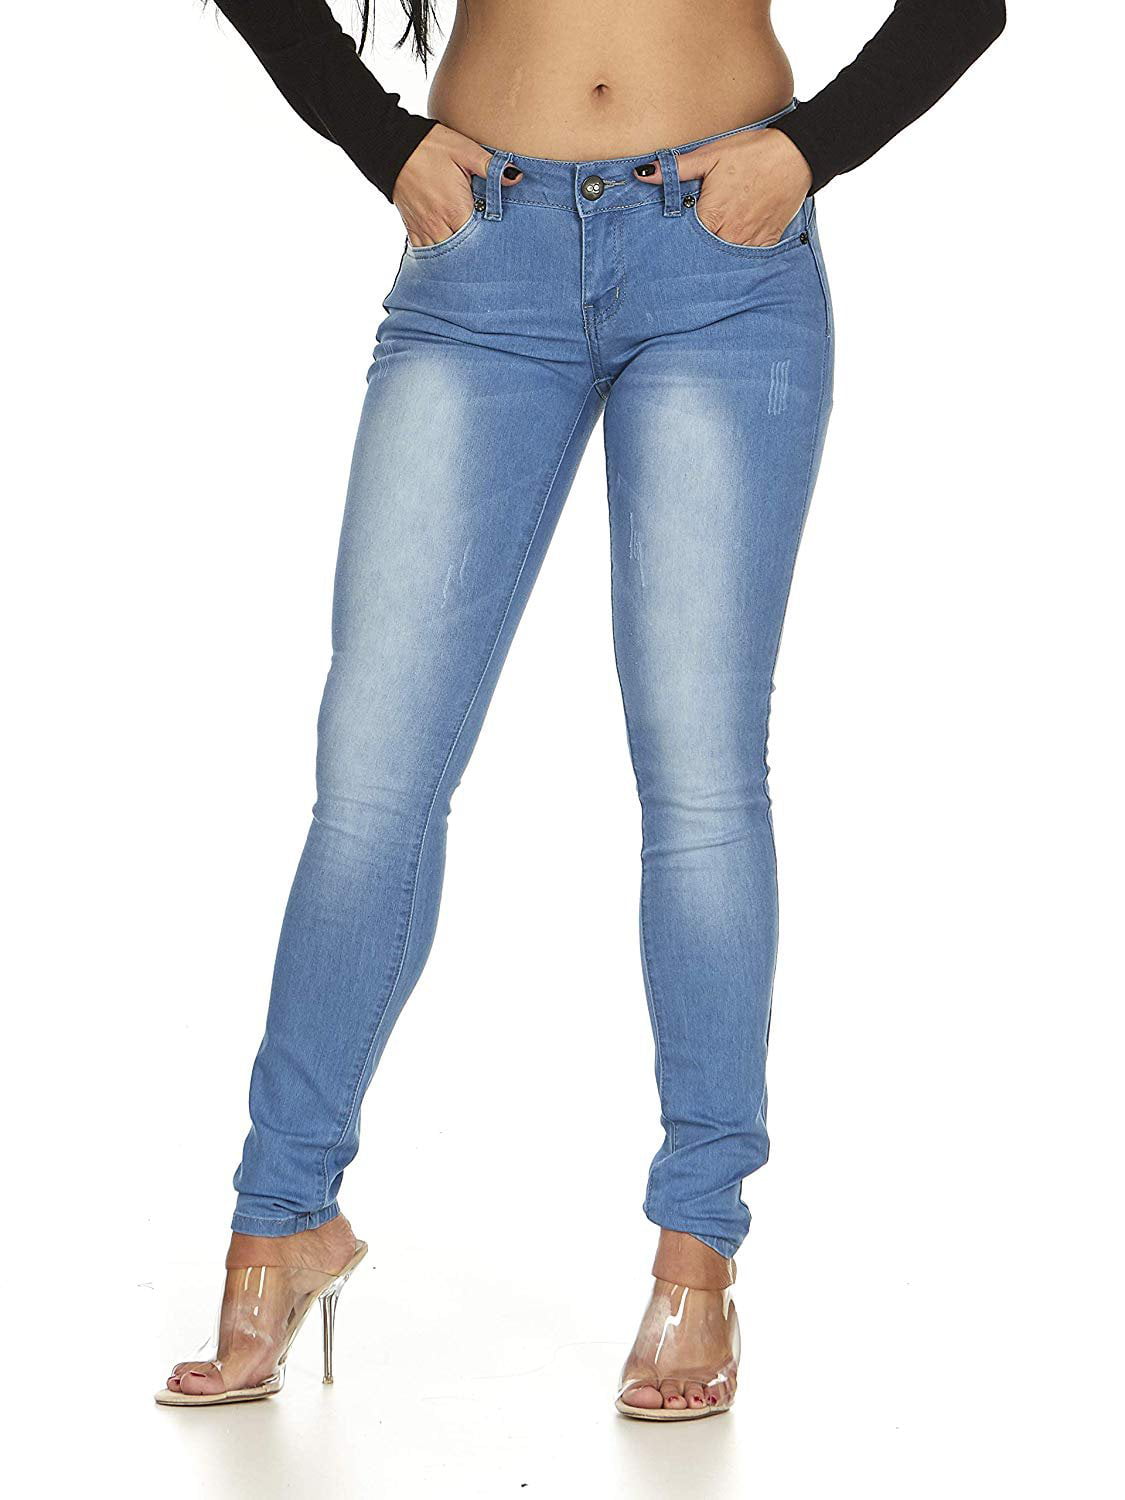 Skinny Juniors Jeans Jeans Stone Electric Women Sizes for Slim Blue 7 Stretch Fit Classic Washed